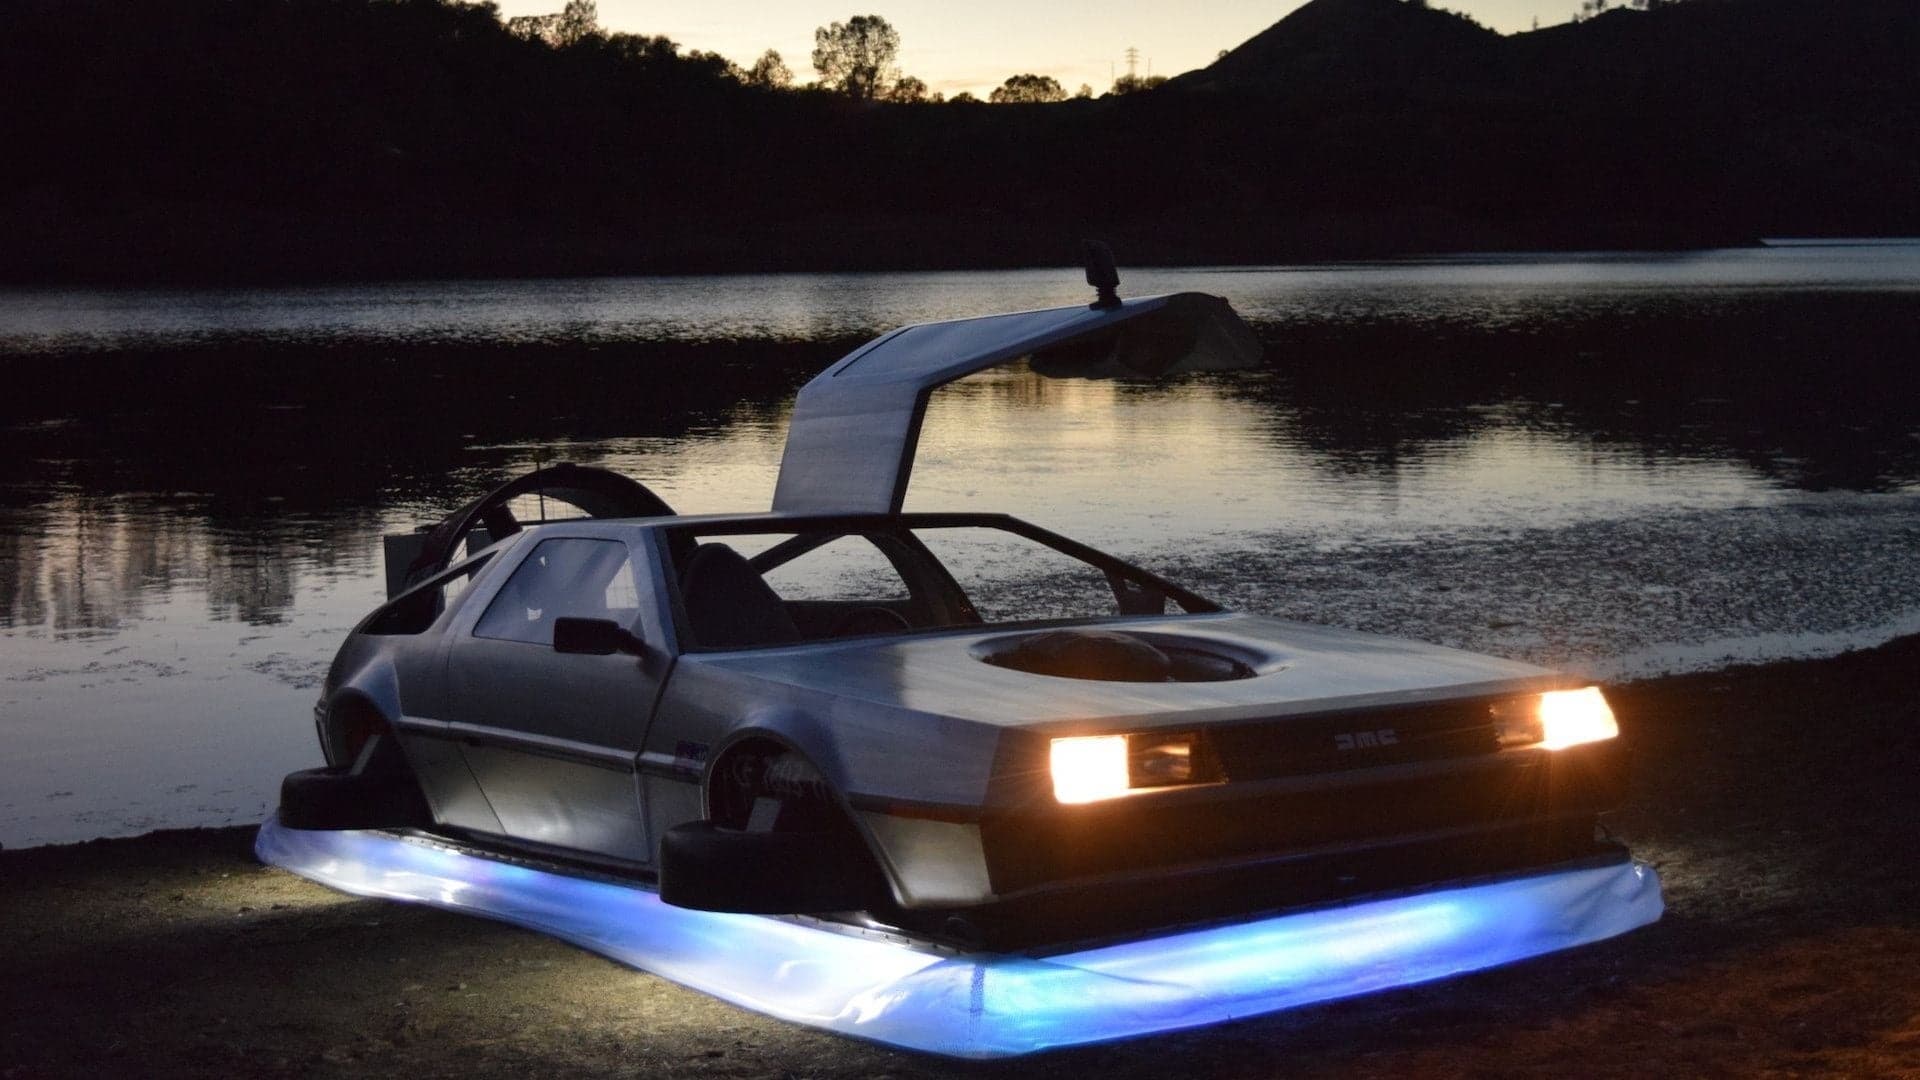 For Sale: DeLorean Hovercraft Replica Made of Plywood That Runs, Drives on Land and Sea